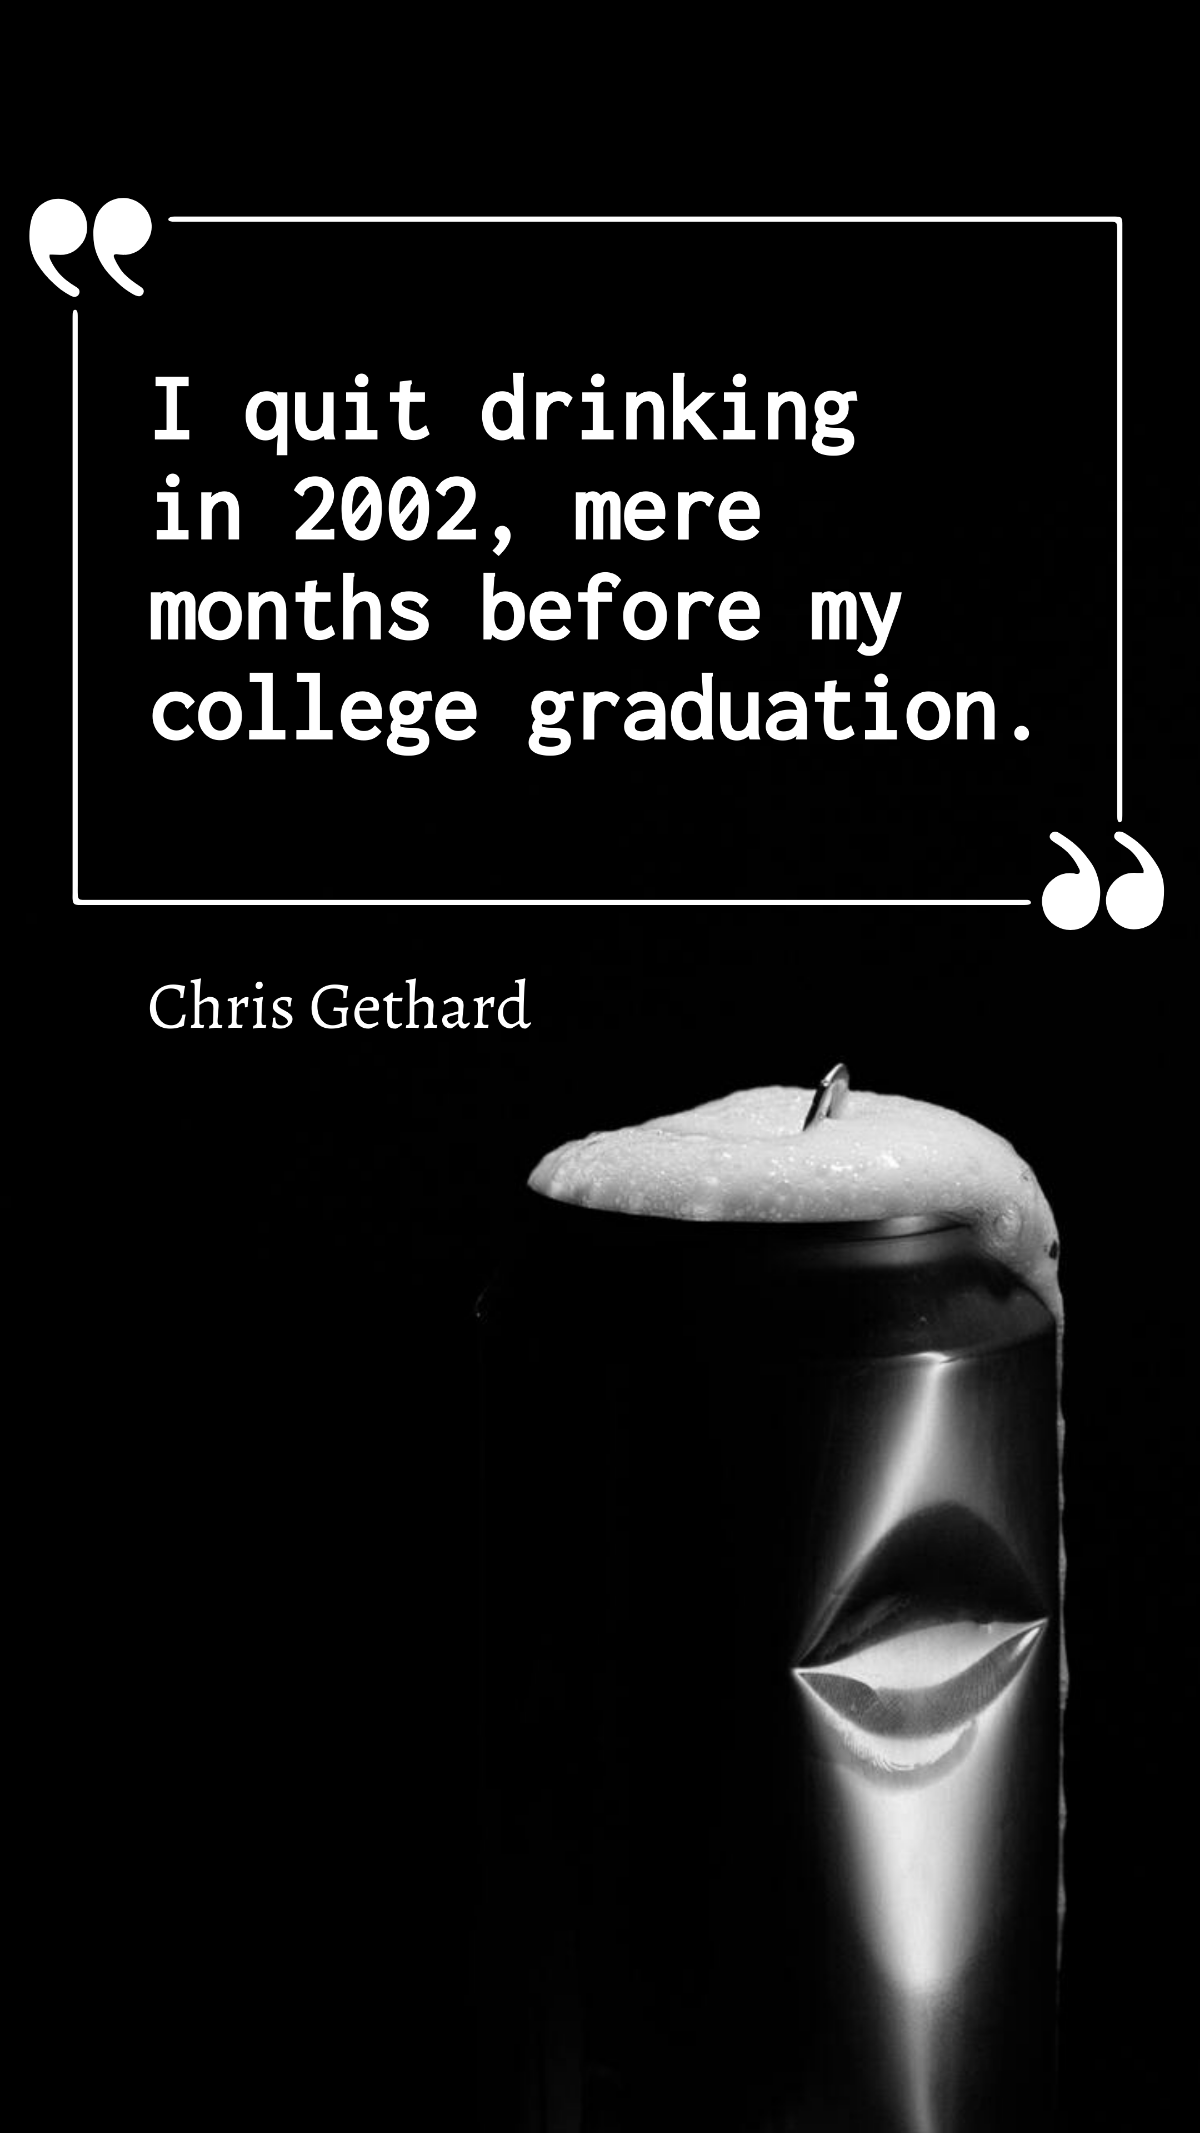 Chris Gethard - I quit drinking in 2002, mere months before my college graduation. Template